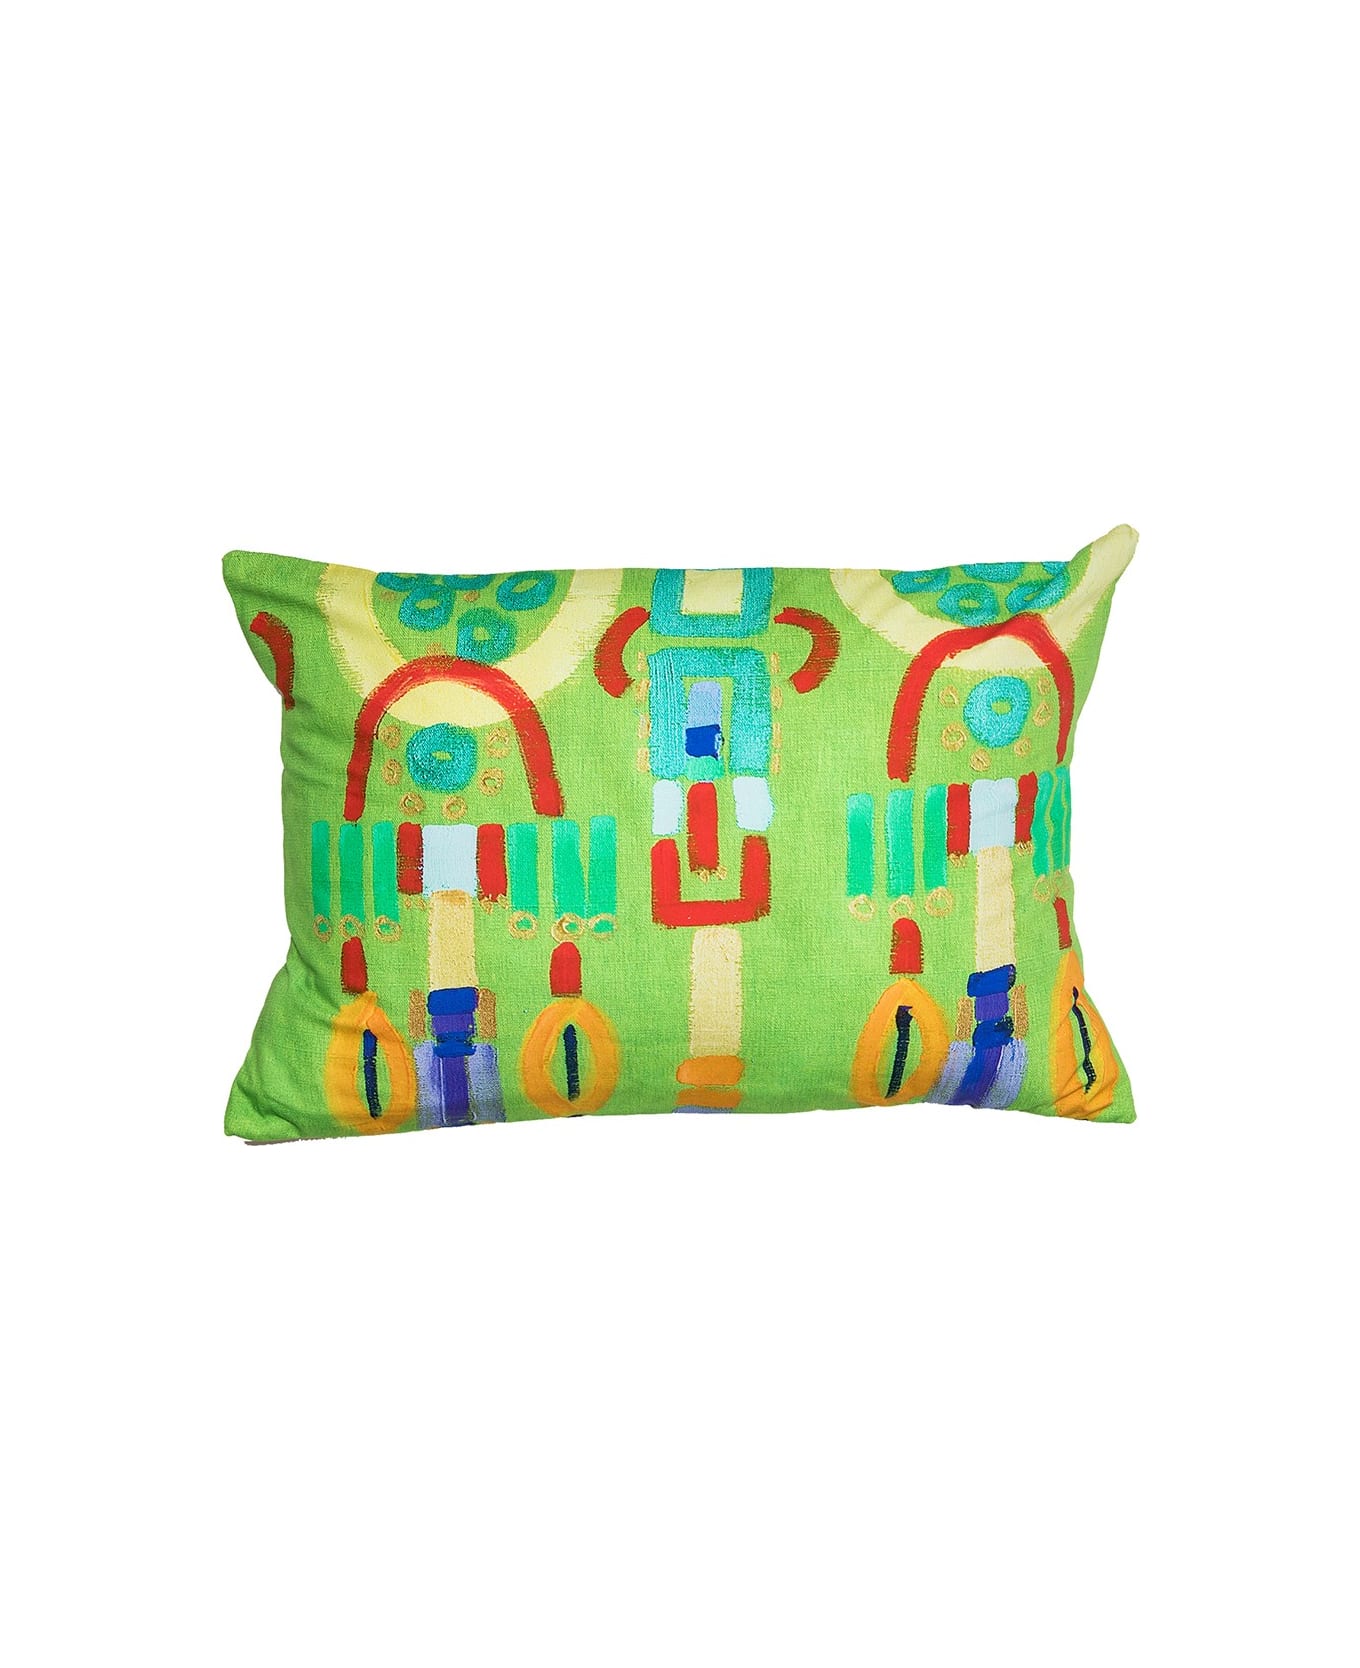 Le Botteghe su Gologone Printed Cushions 40x60 Cm - Lime Green クッション